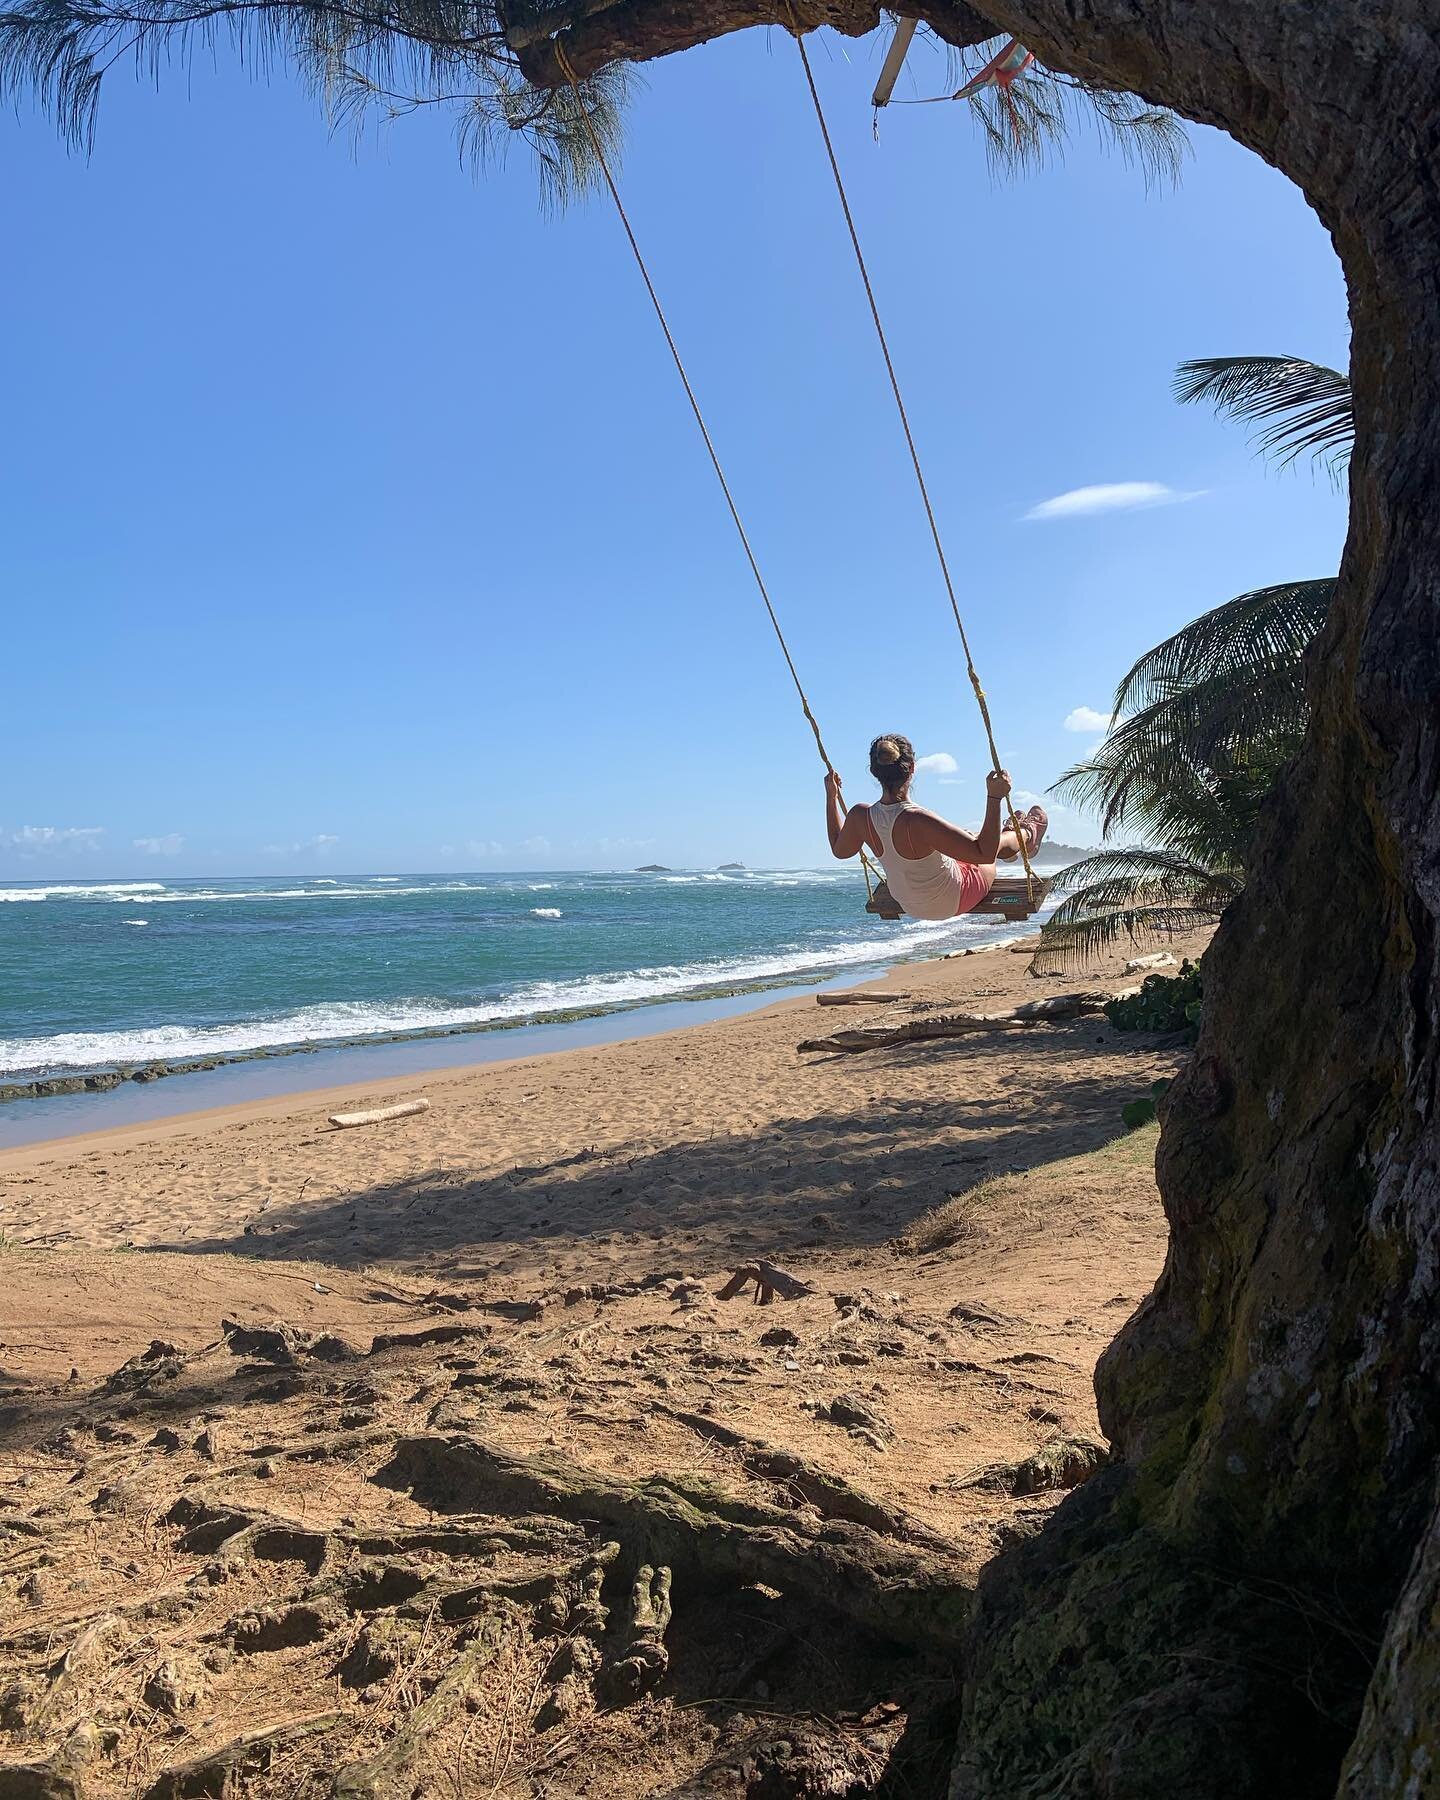 Swinging into 2022. @noahmmayogi has a fun tourism idea for #puertorico. Maybe he&rsquo;ll find someone to do it with! Guess where this is? #puertorico #yoga #yogateacher #tourism #swing #ocean #beach #explore #nature #travel #fun #tourist